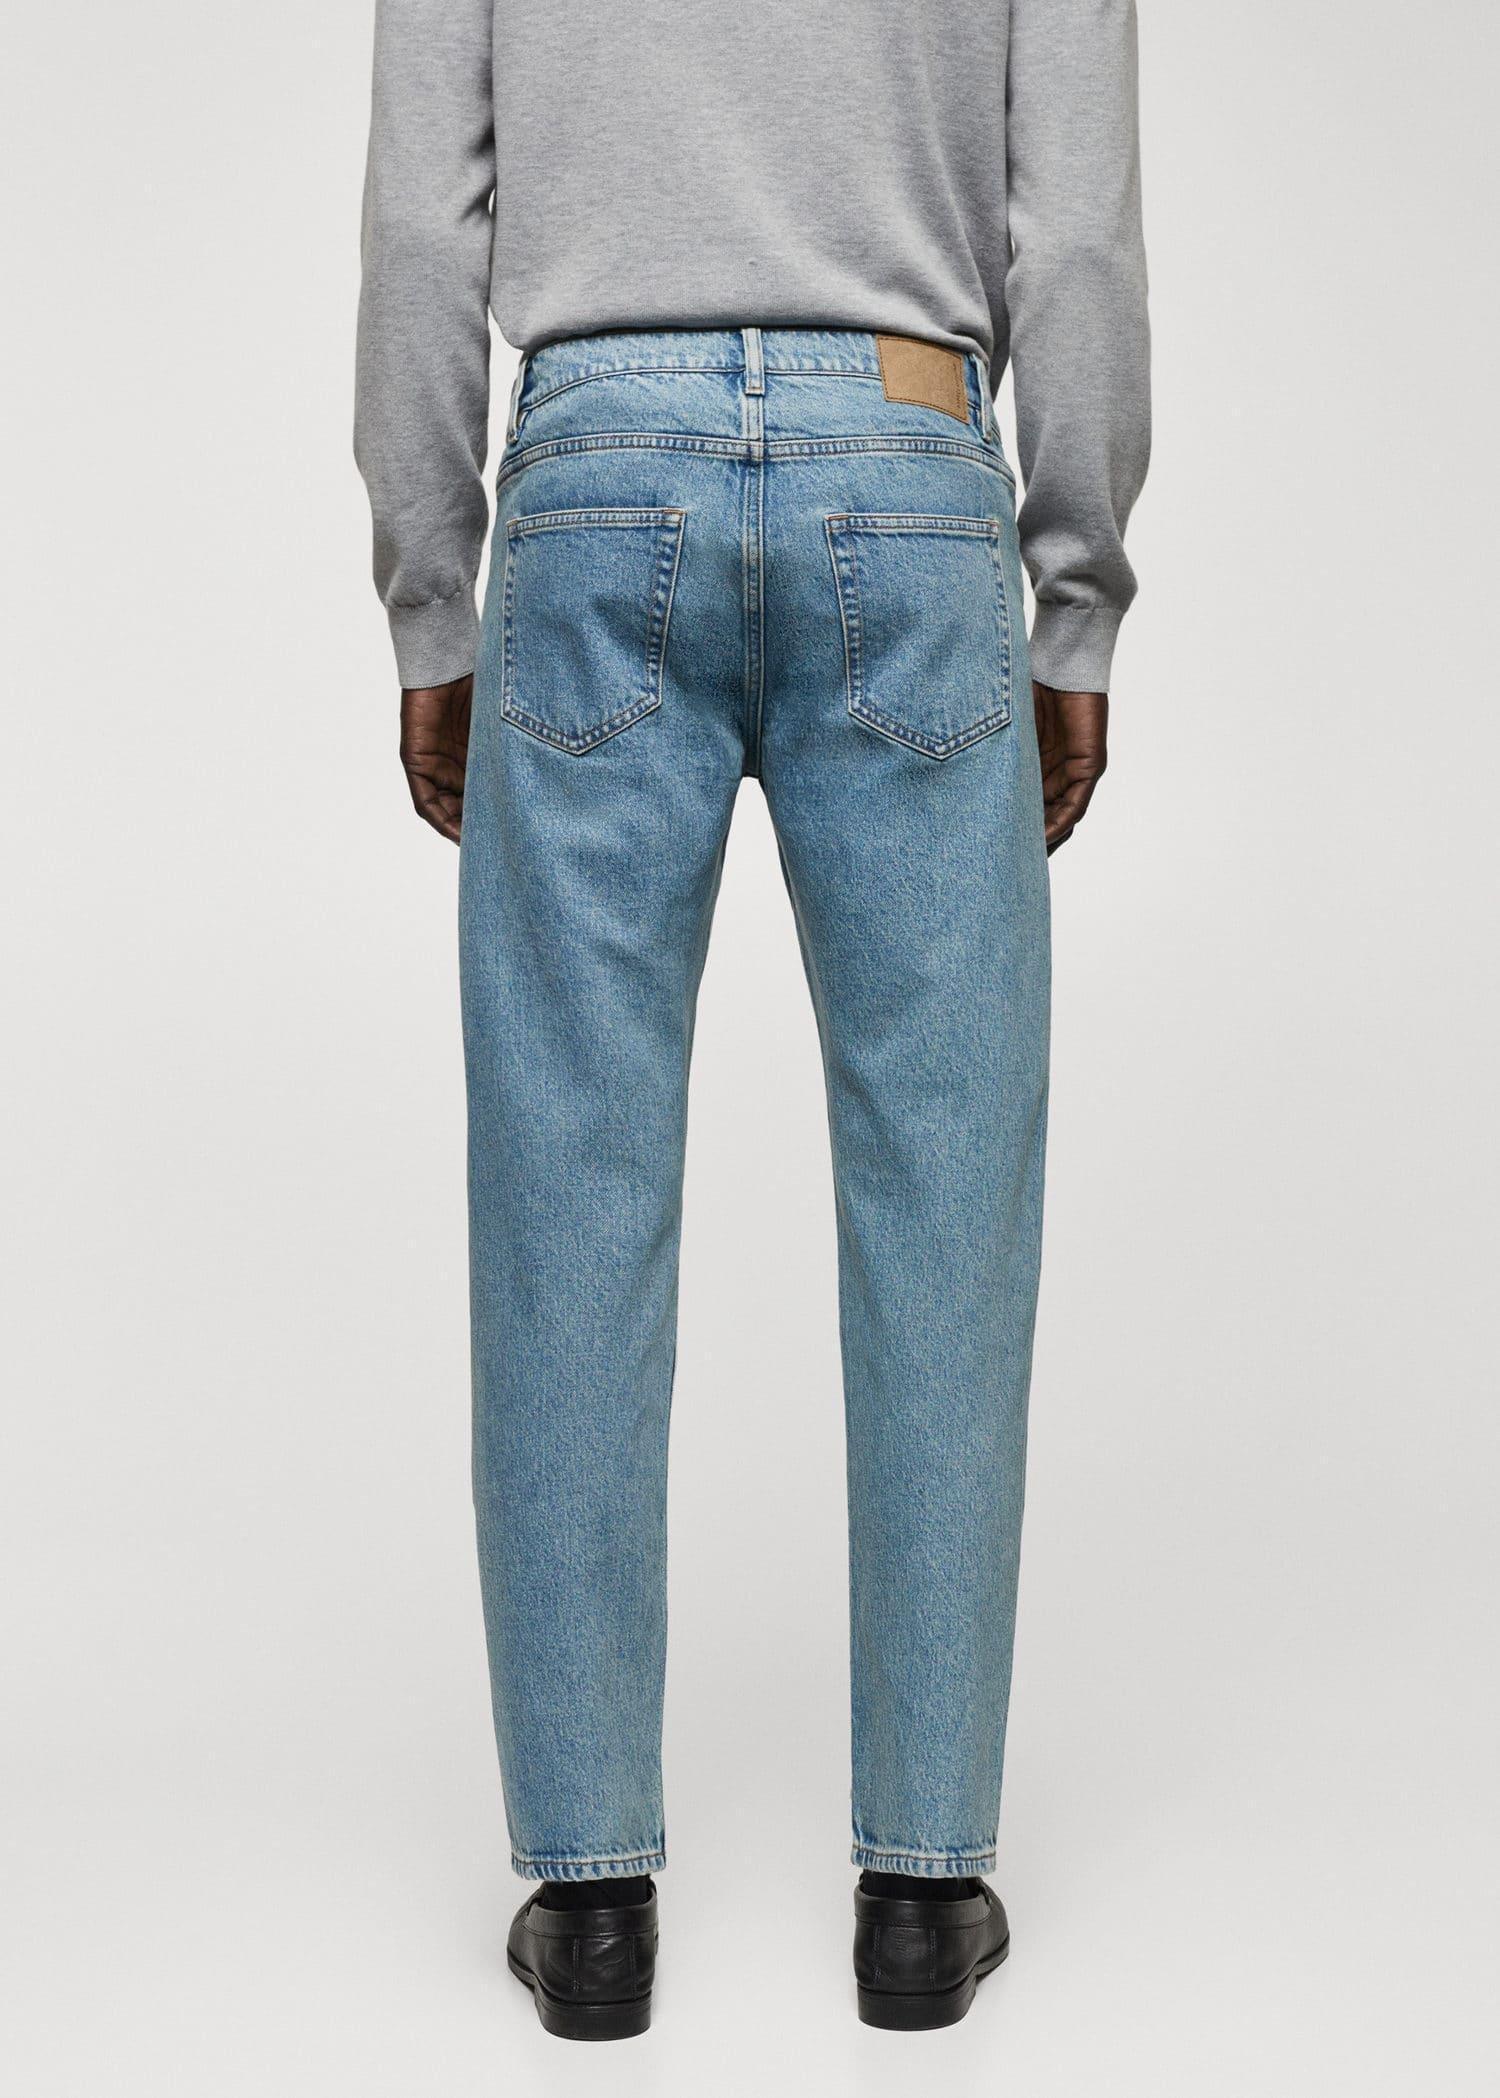 Mango - Blue Ben Tapered Cropped Jeans